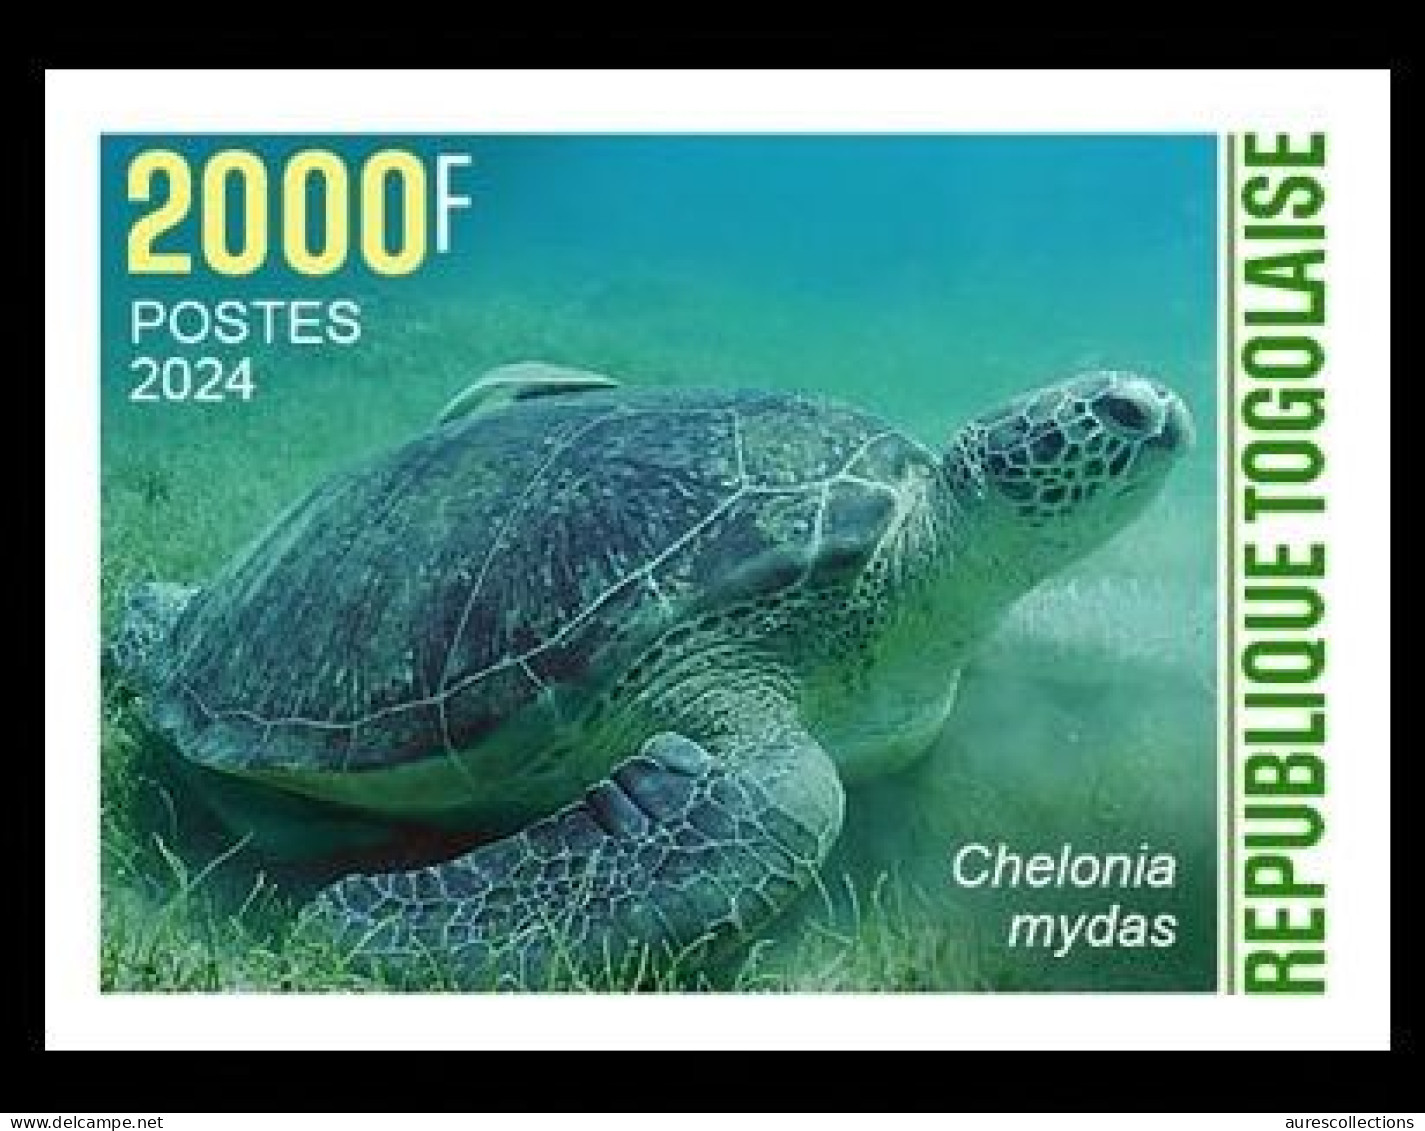 TOGO 2024 STAMP 1V IMPERF 2000F - CAMOUFLAGE - GREEN TURTLE TURTLES TORTUE VERTE TORTUES - REPTILES - MNH - Tortugas